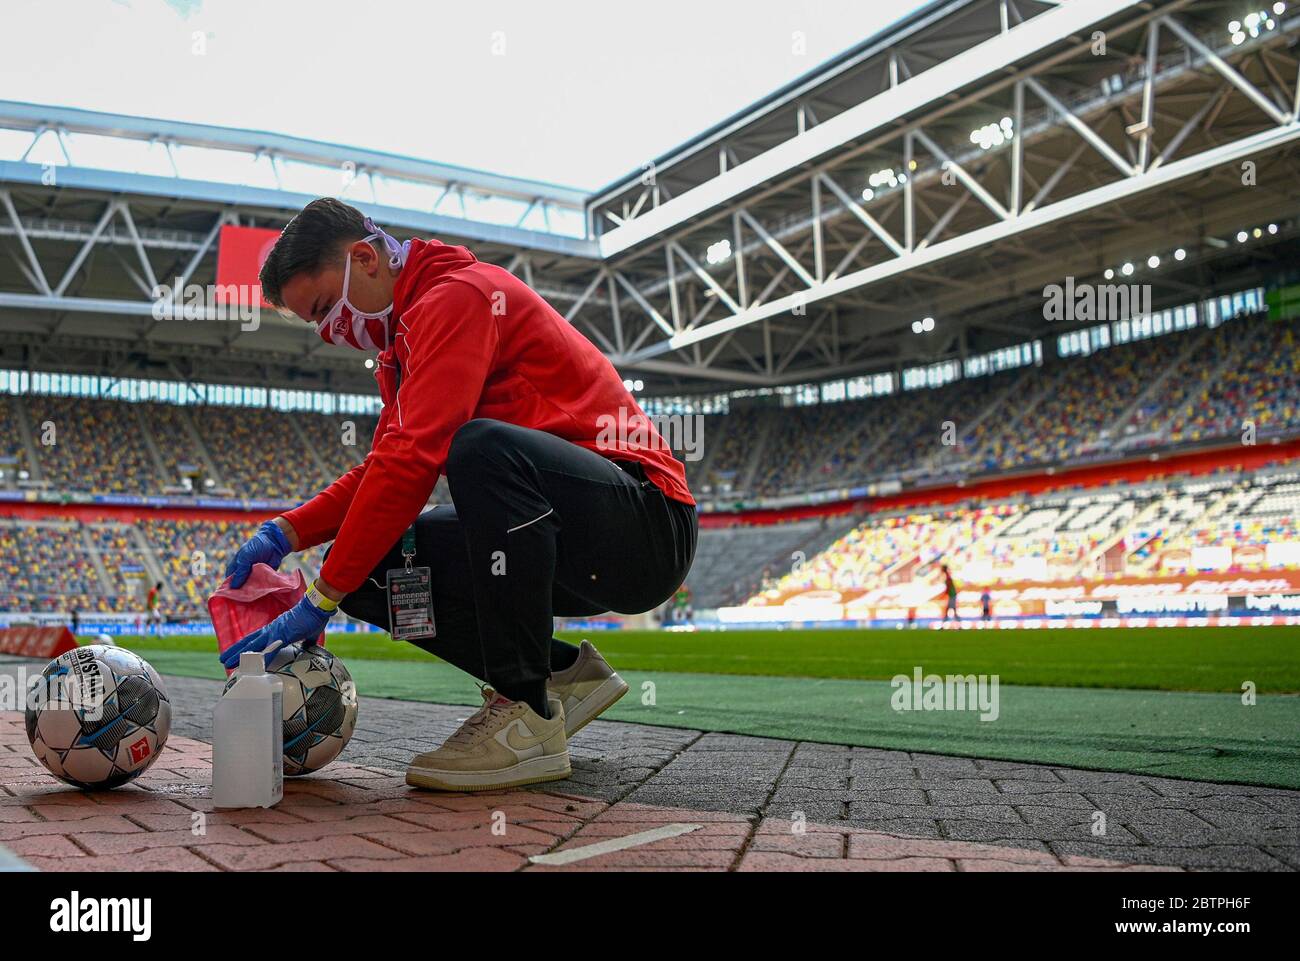 Footballs are disinfected during the Bundesliga soccer match between Duesseldorf and Paderborn in the Merkur Spiel-Arena, Duesseldorf, Germany, Saturday, May 16, 2020. The German Bundesliga becomes the world's first major soccer league to resume after a two-month suspension because of the coronavirus pandemic. Stock Photo